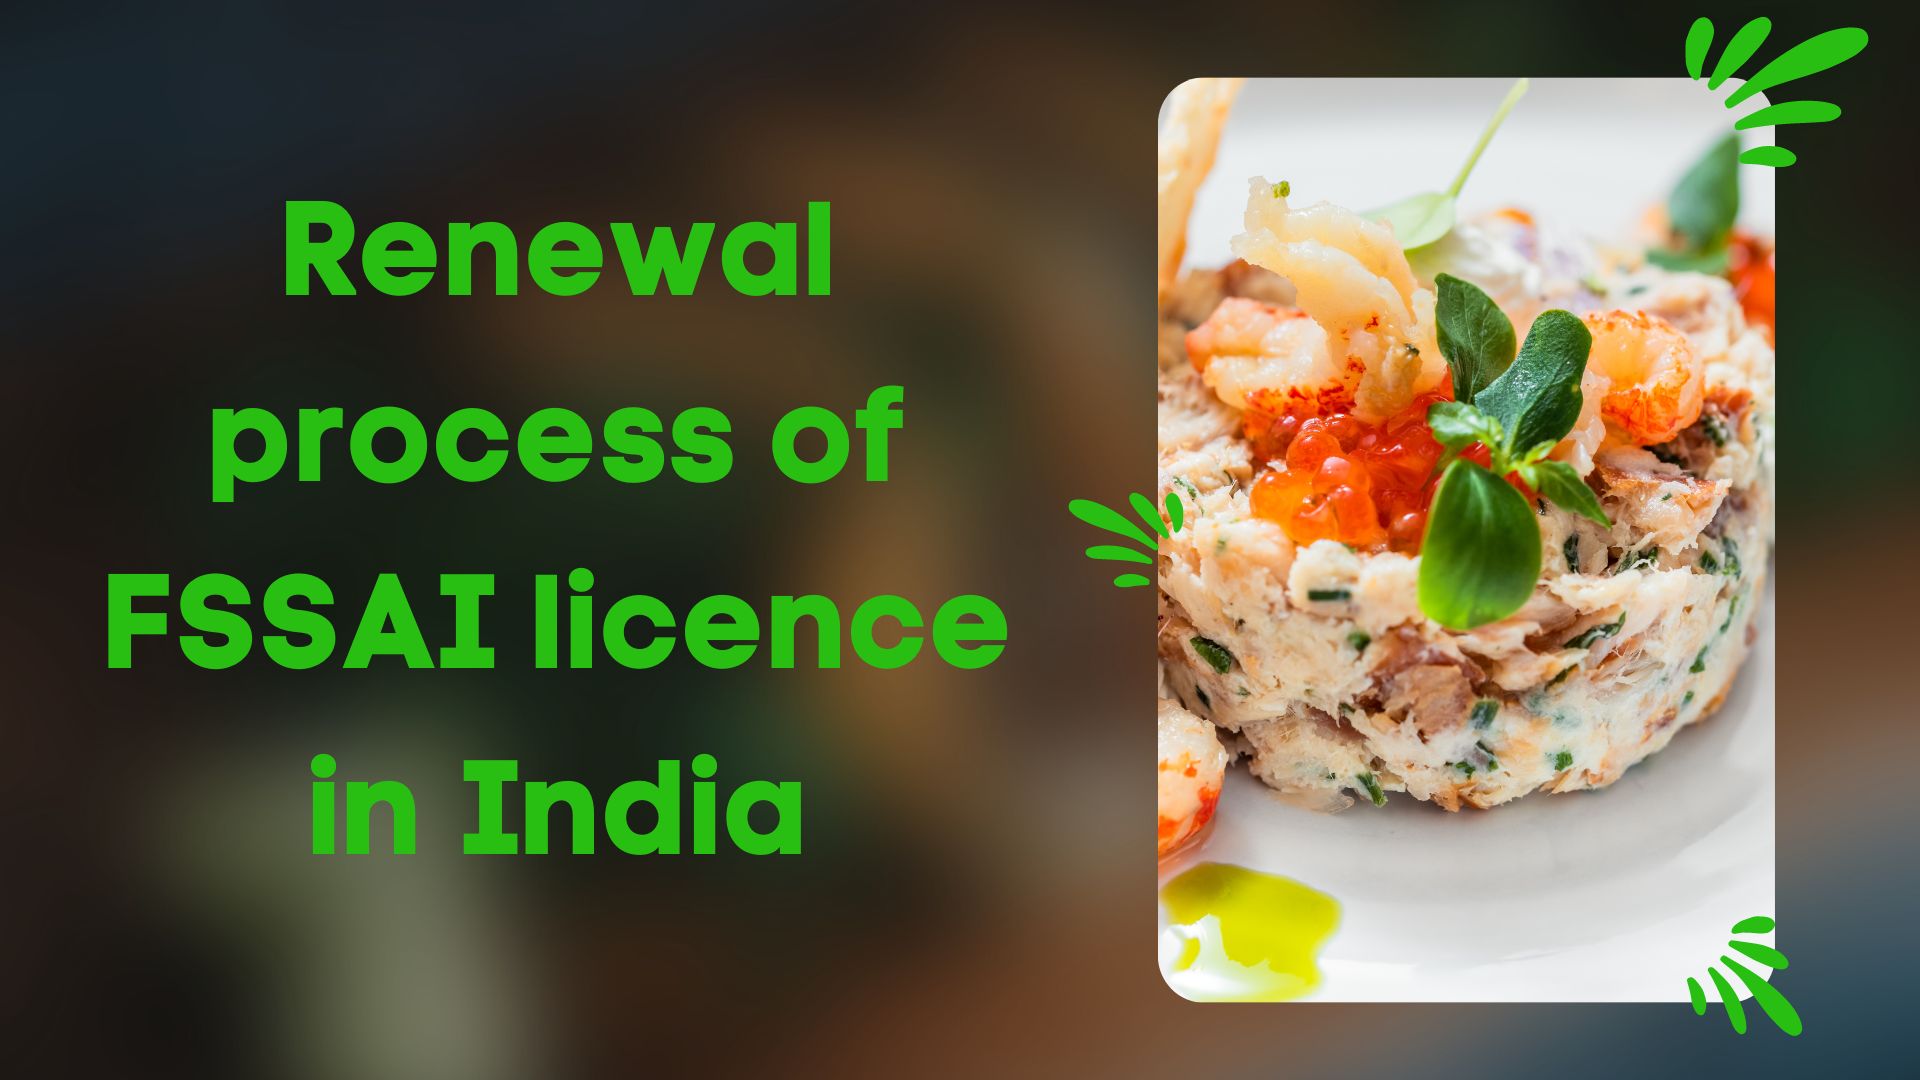 Renewal process of FSSAI licence in India